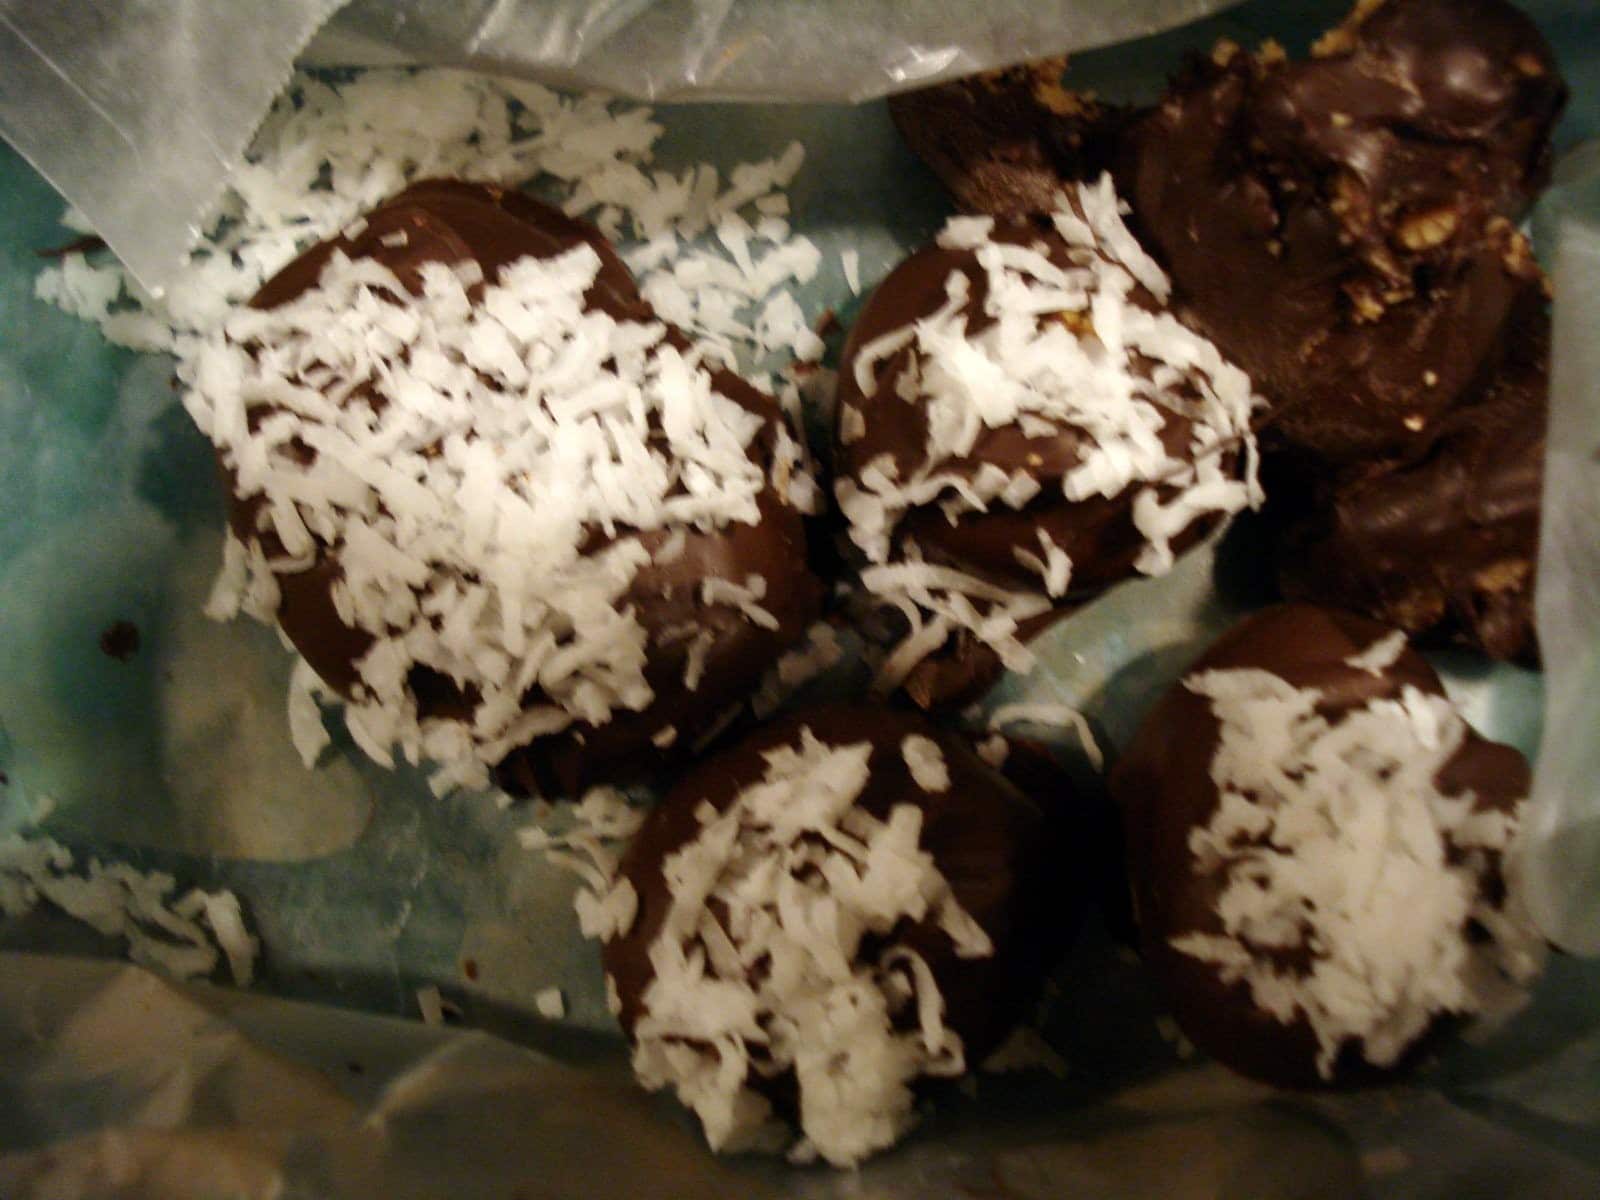 Peanut butter and chocolate eggs with coconut